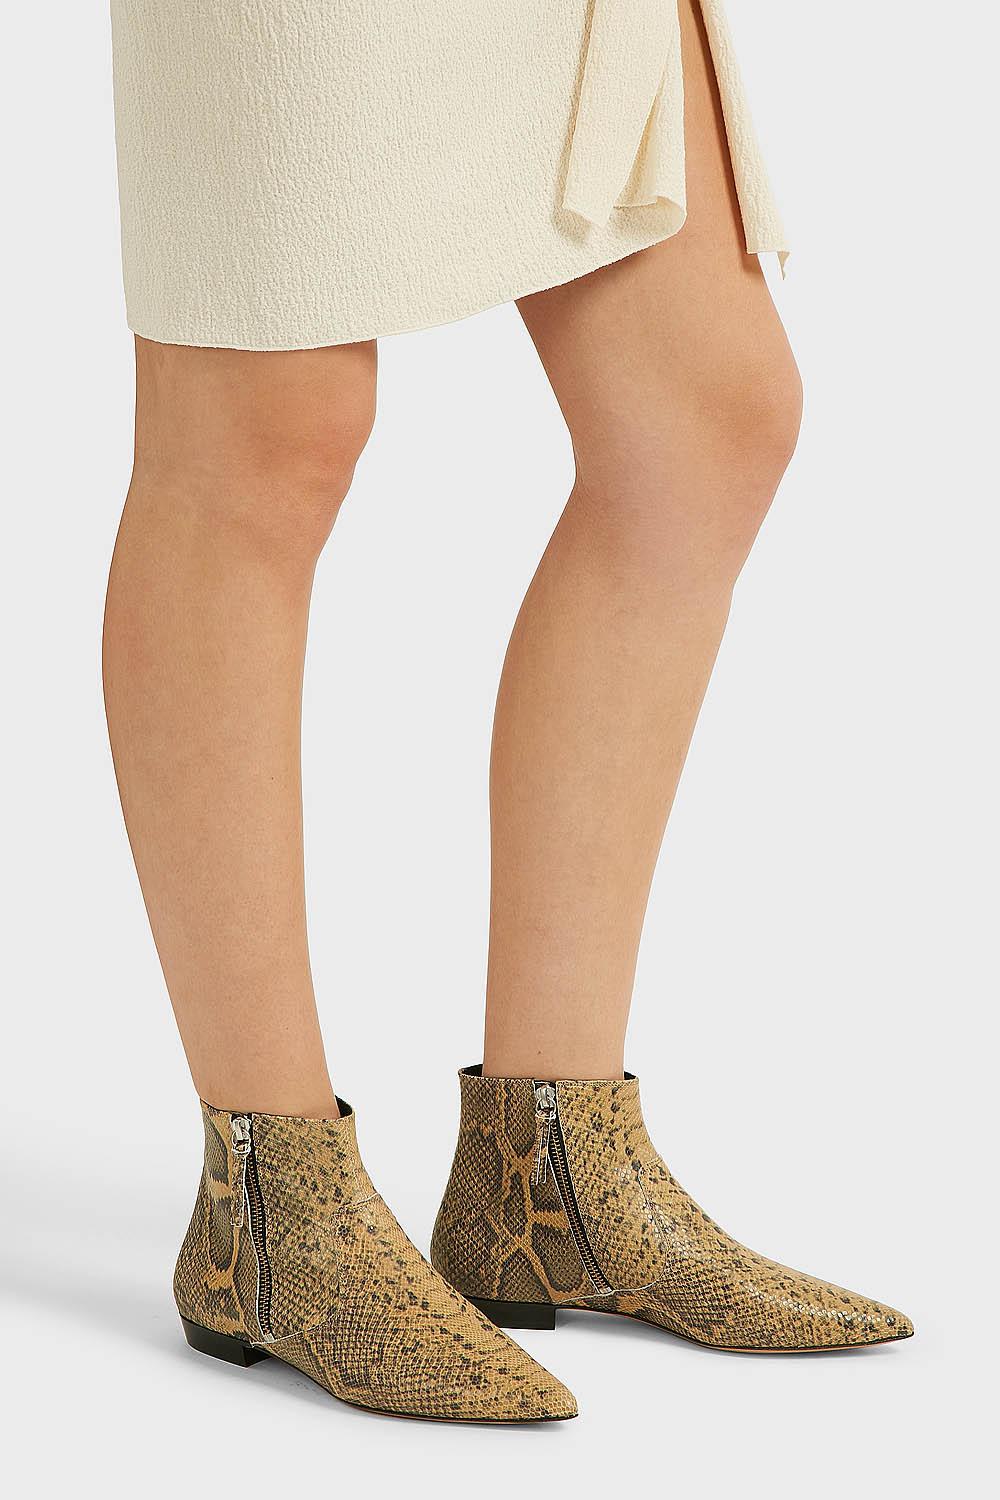 Isabel Marant Dawie Snake-effect Leather Ankle Boots - Lyst